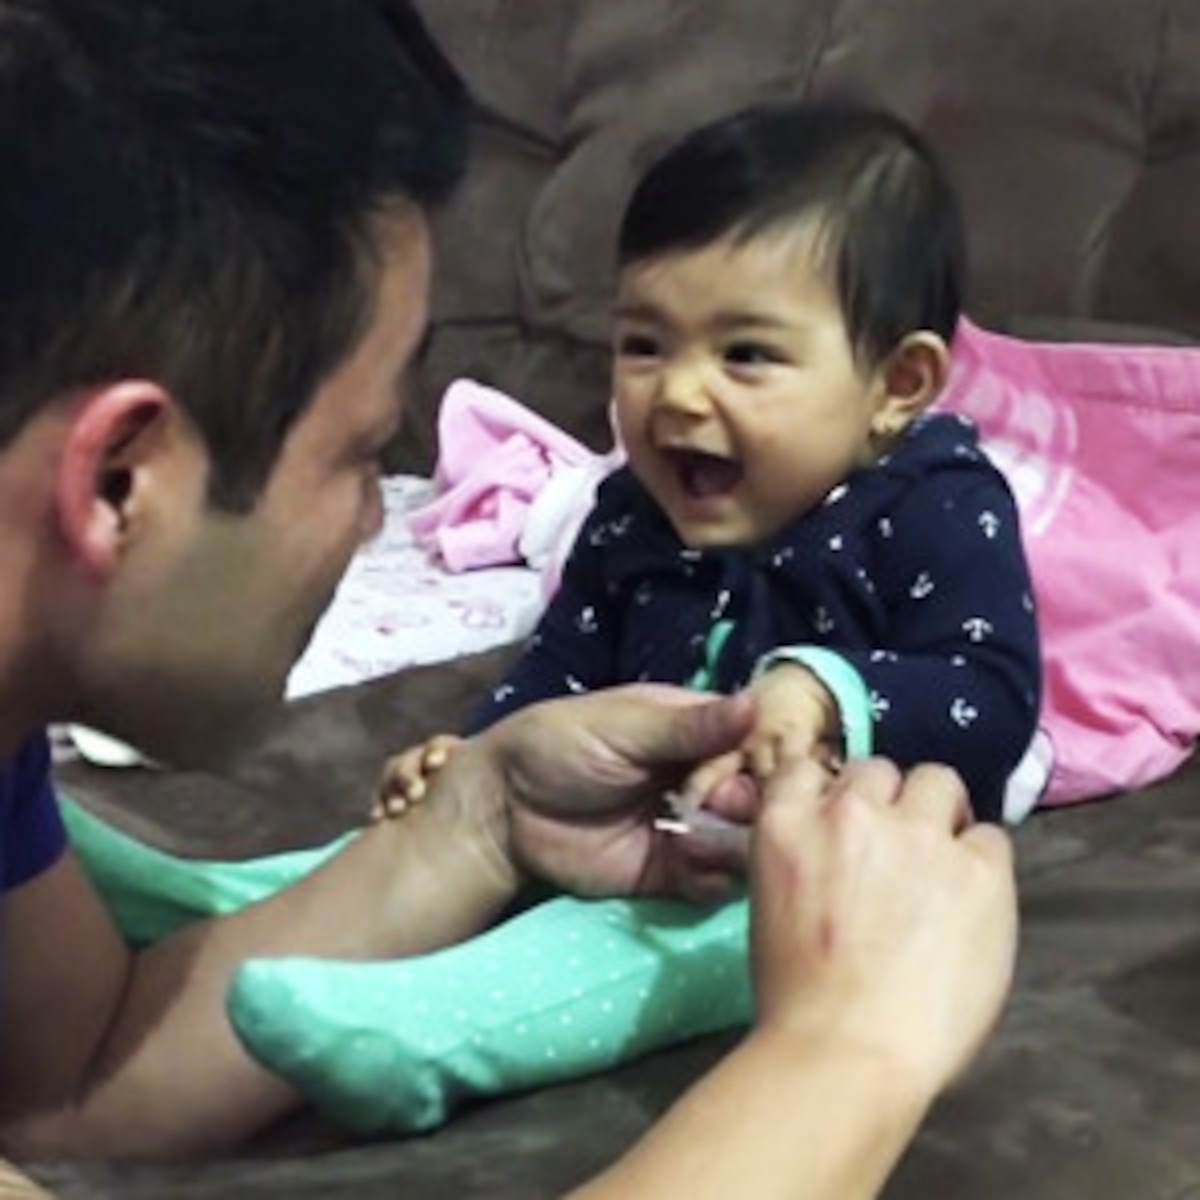 This Baby Can't Stop Scaring Daddy as He Tries to Cut Her Nails - E! Online